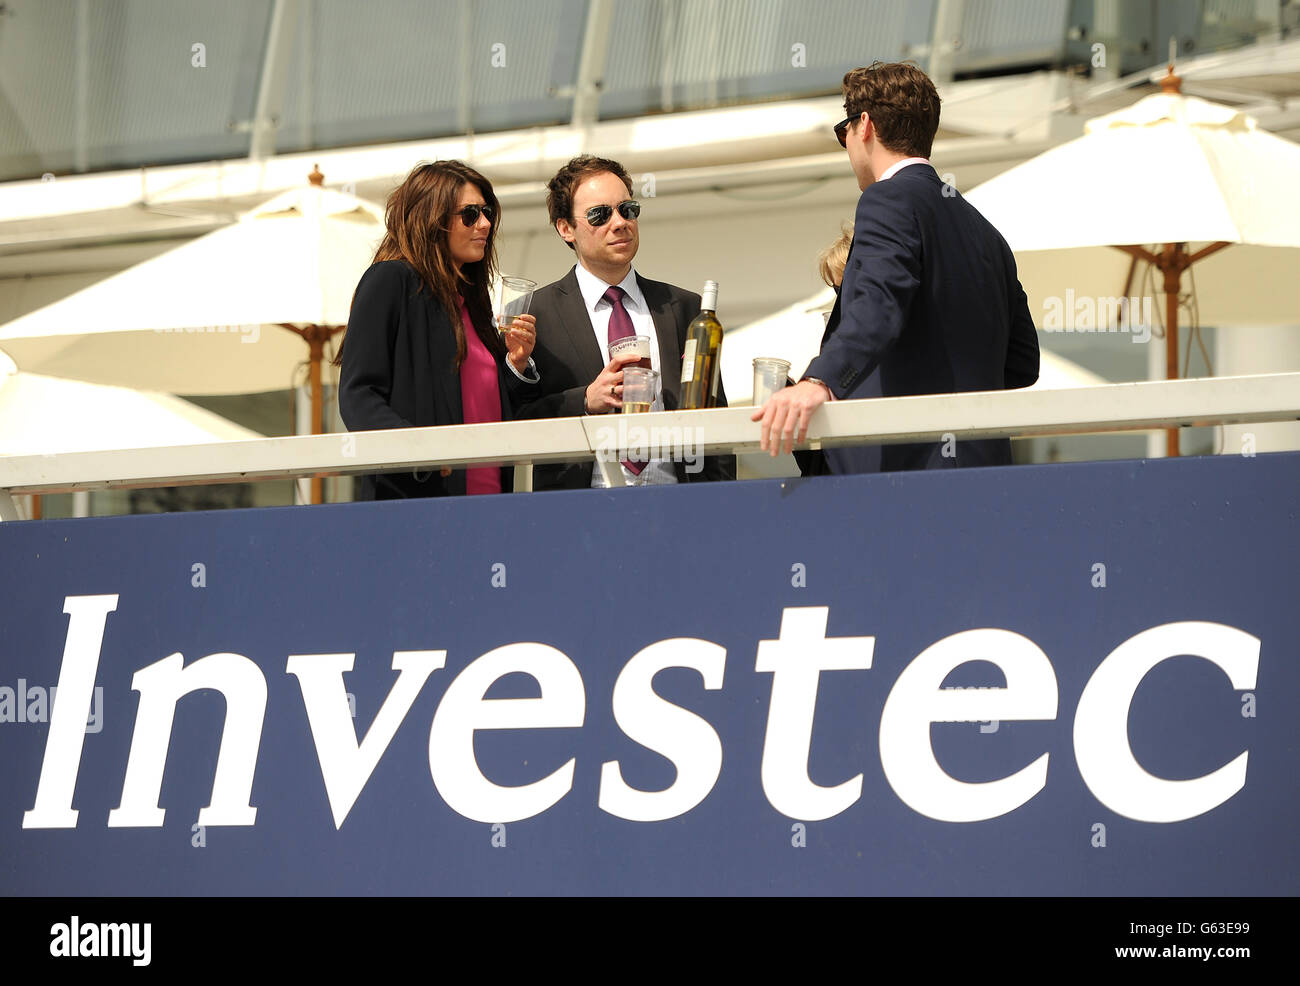 Horse Racing - Investec Spring Meeting - Epsom Downs Racecourse. Racegoers enjoy the action from the grandstand Stock Photo